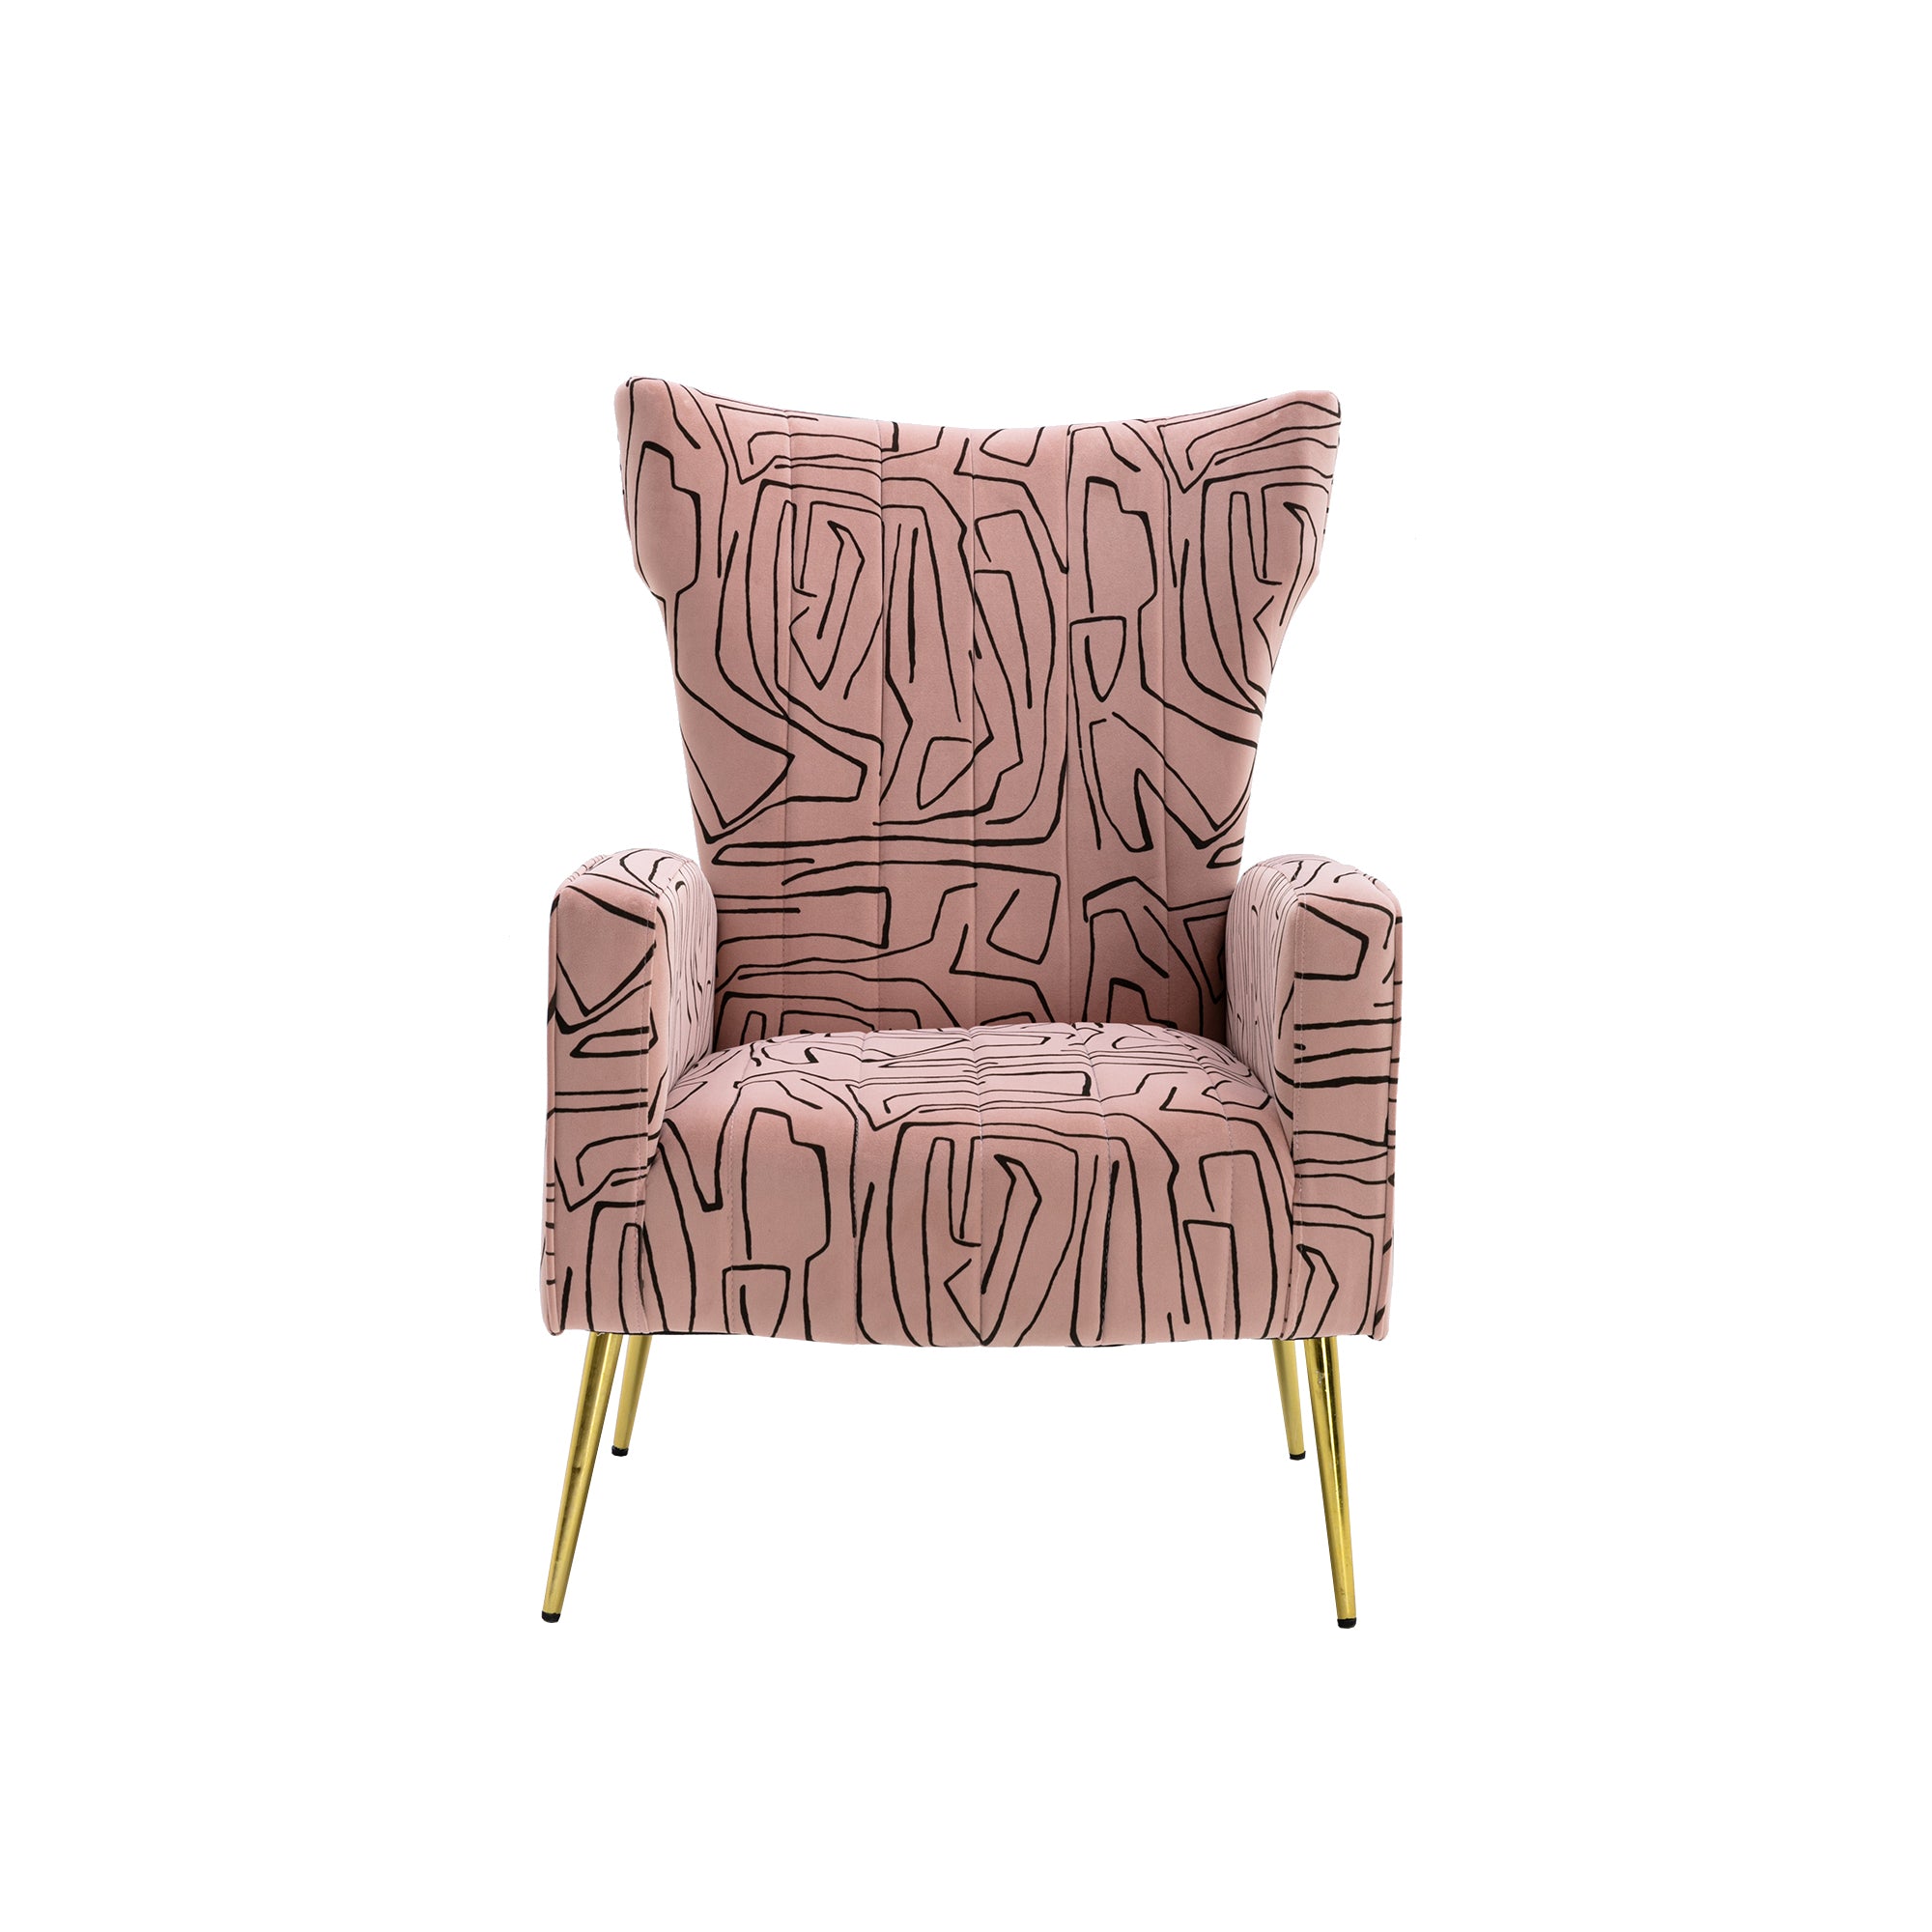 COOLMORE Accent Chair ,leisure single chair with Rose pink-metal